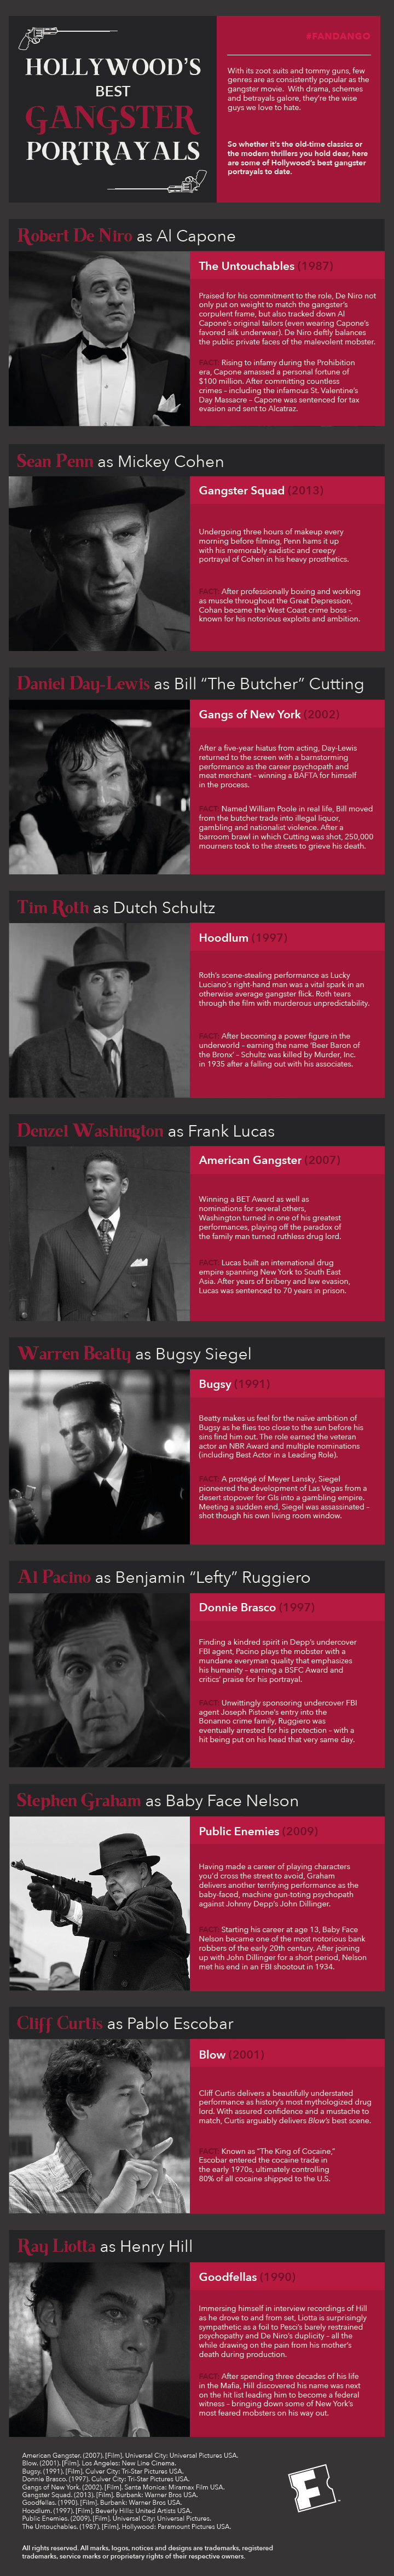 Hollywood's Best Gangster Portrayals